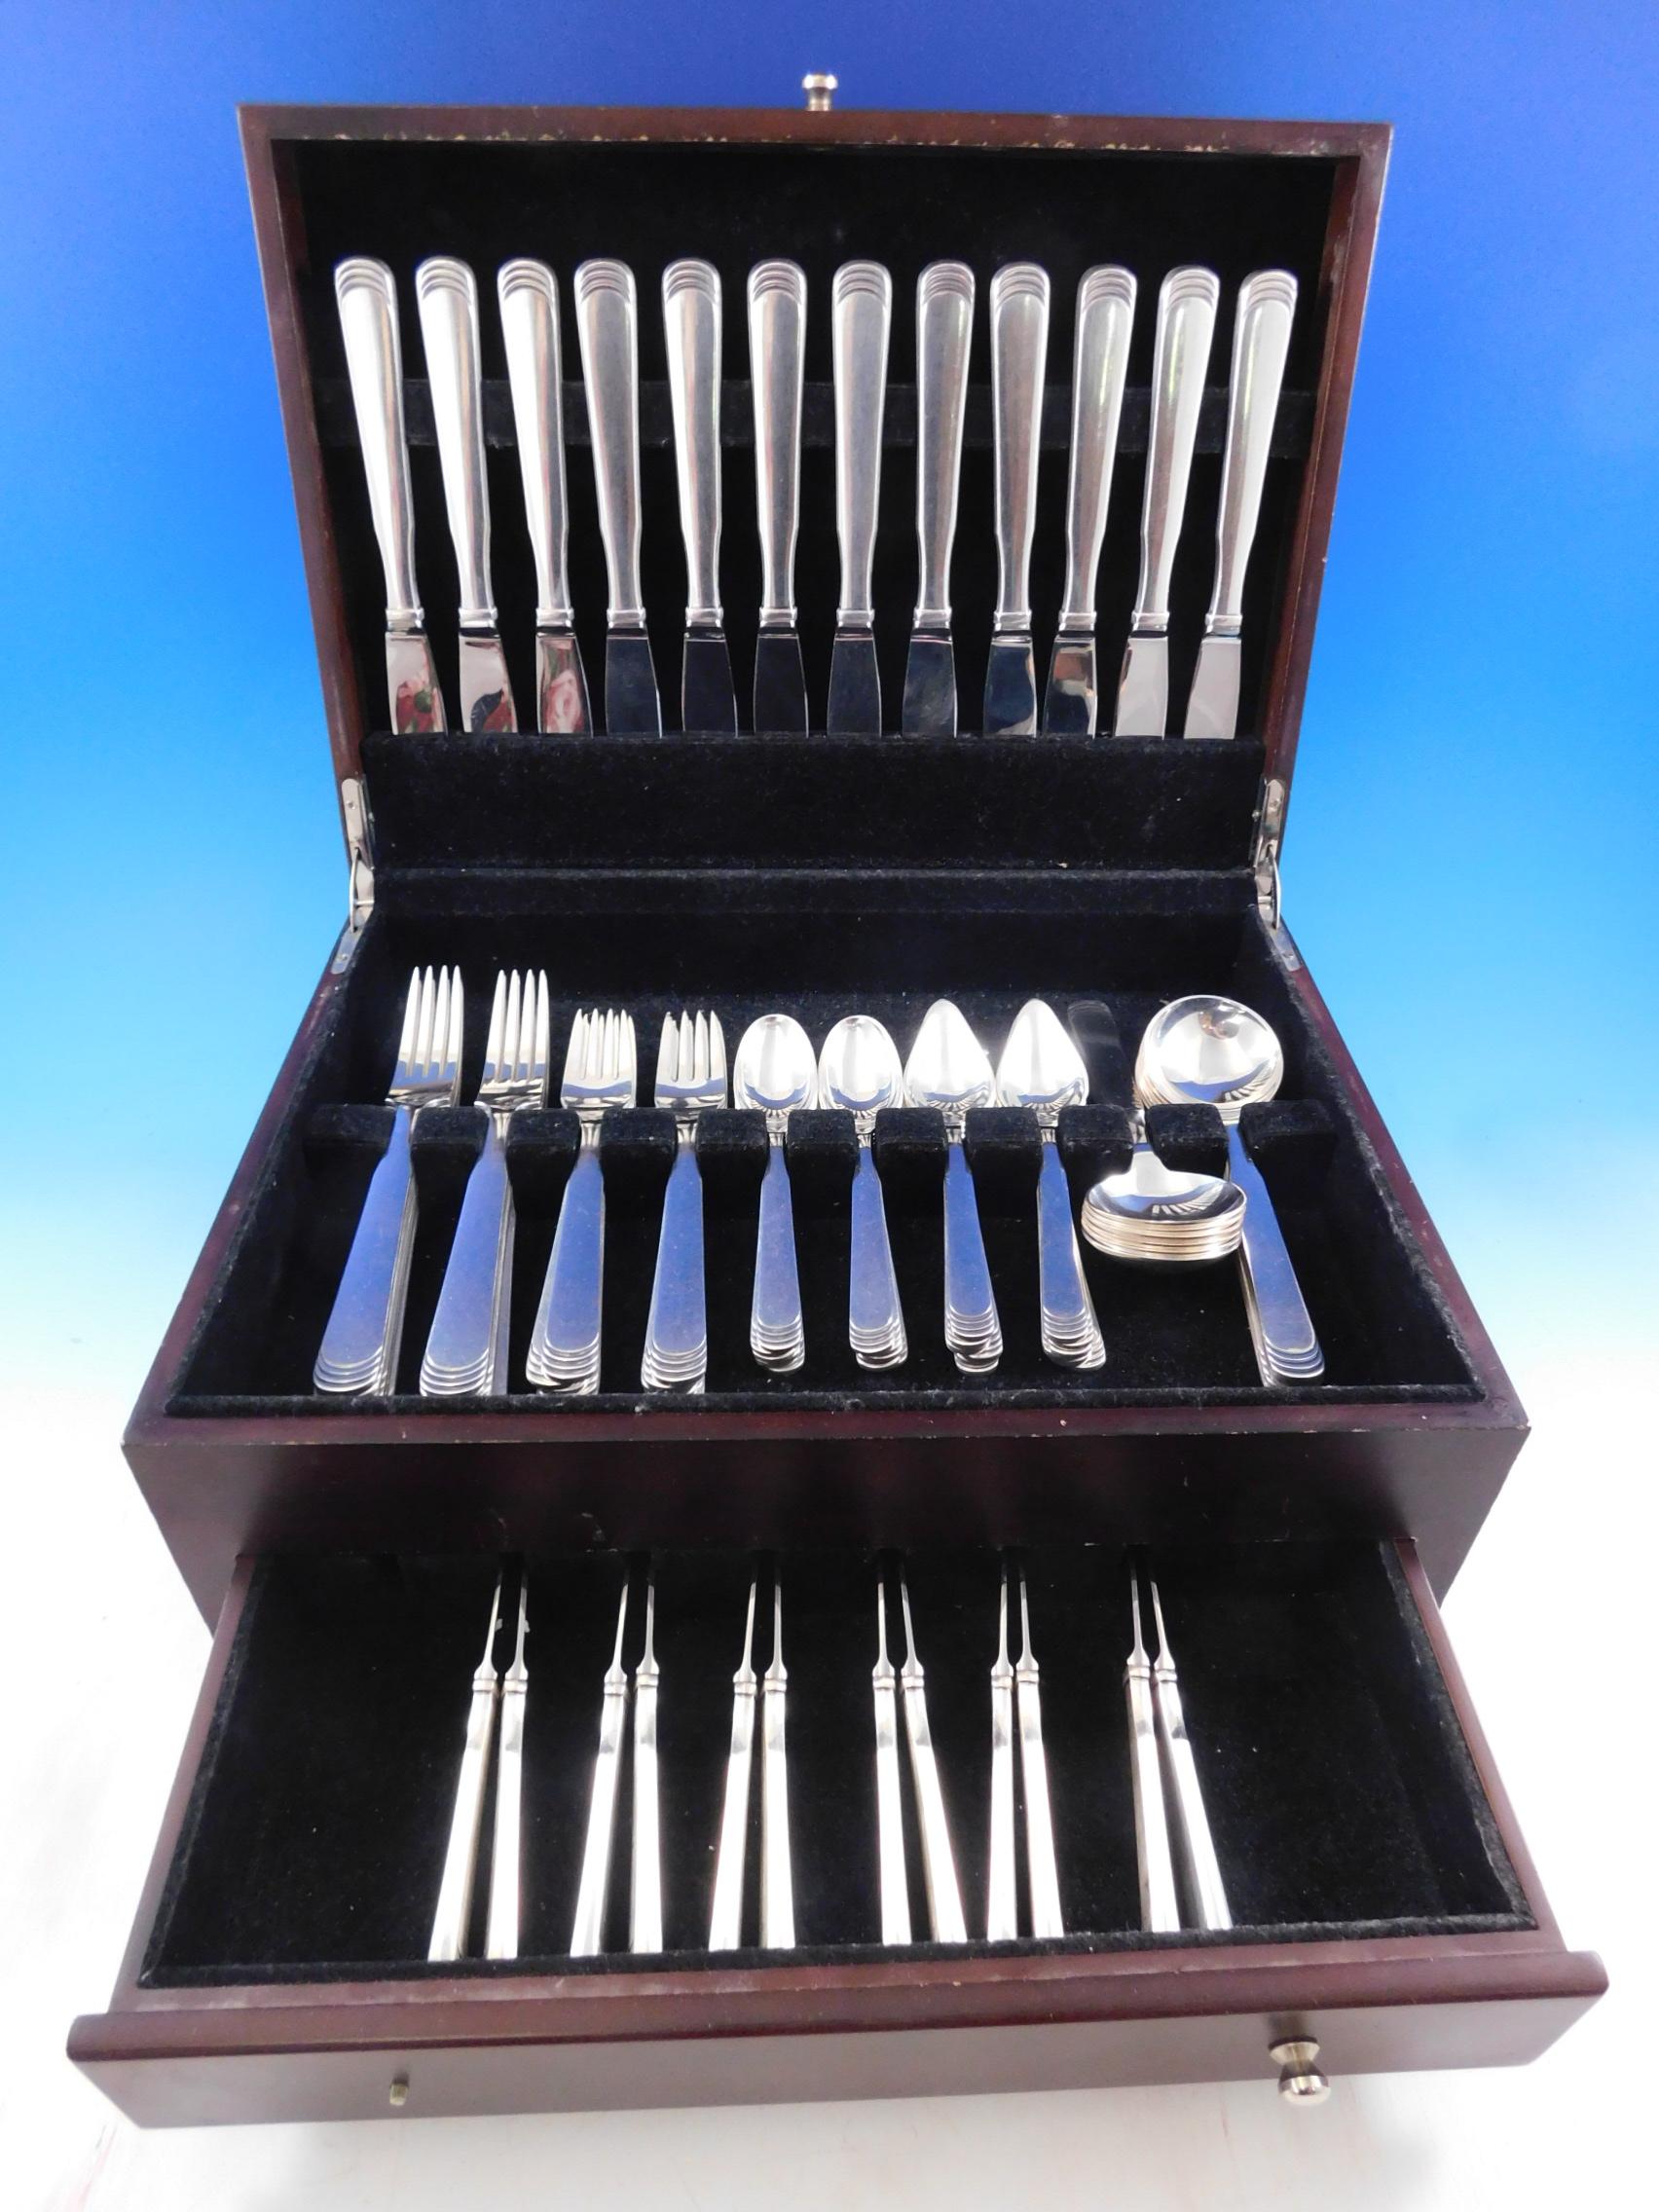 Hans Hansen started out in 1906 in Kolding and primarily made fine cutlery. Hans Hansen remained a prominent Danish company till its absorption into Royal Copenhagen in 1991. This is one of his most desirable patterns. The pieces are heavy and well